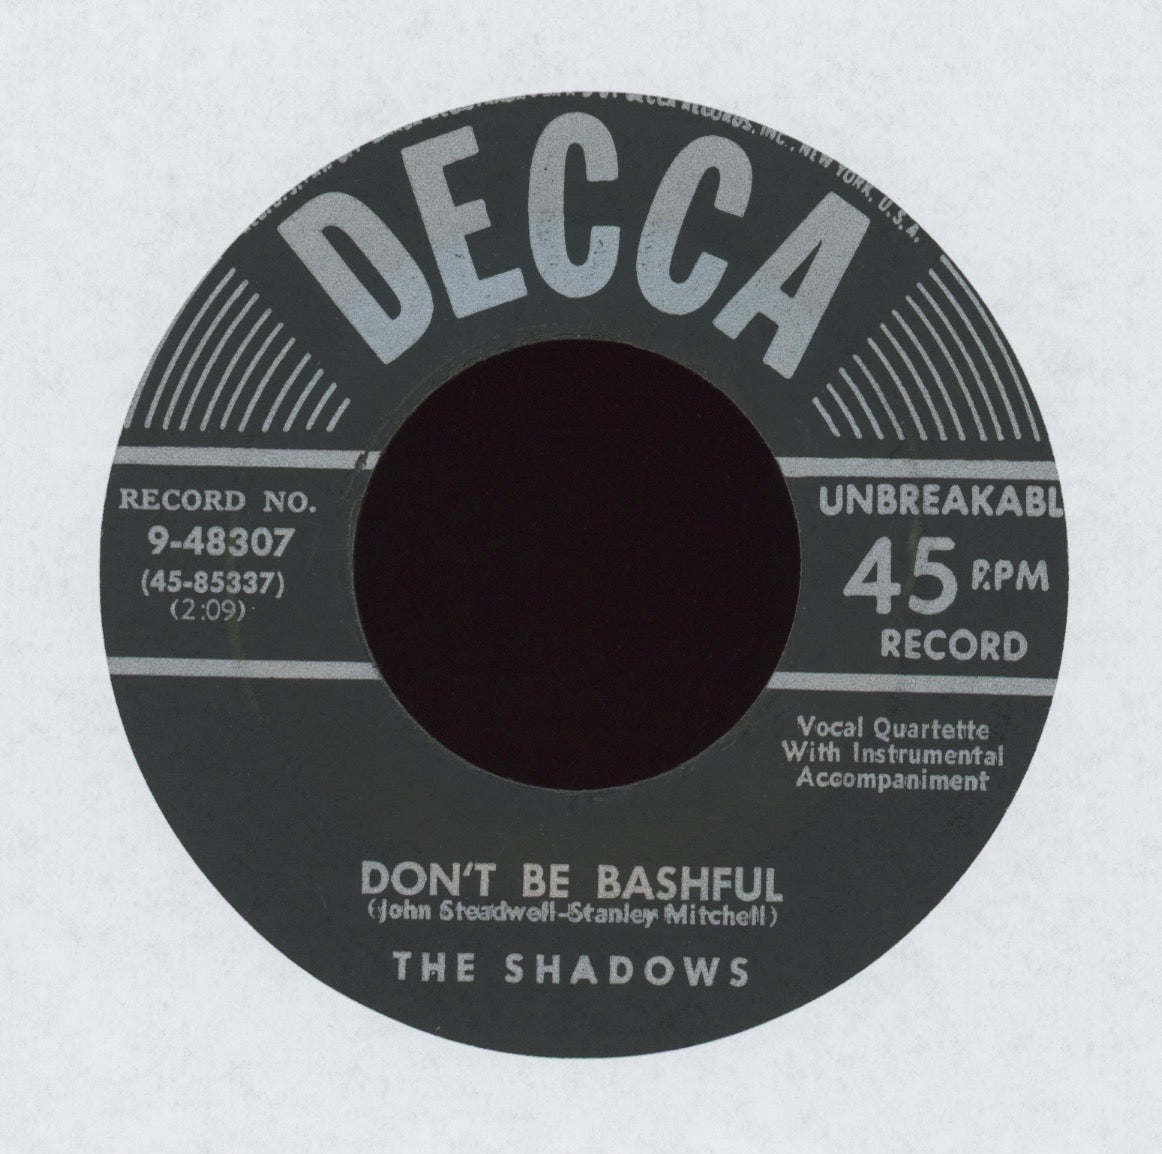 The Shadows - Don't Be Bashful on Decca